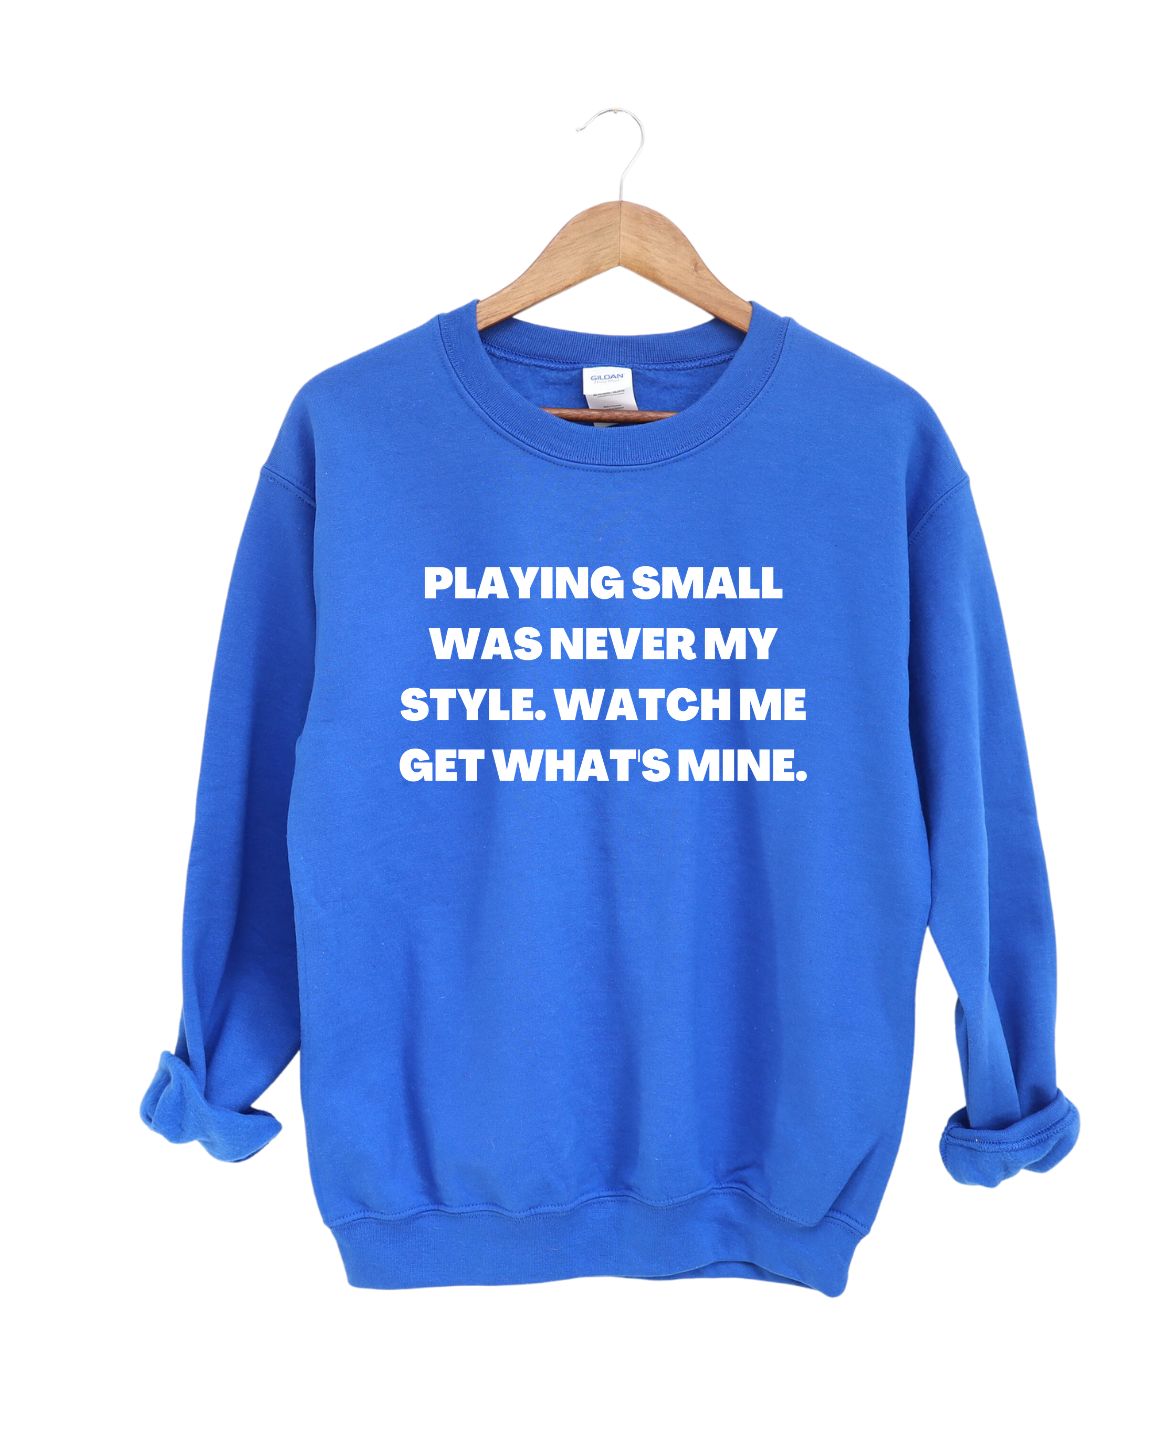 Playing small was never my style   -Sweatshirt